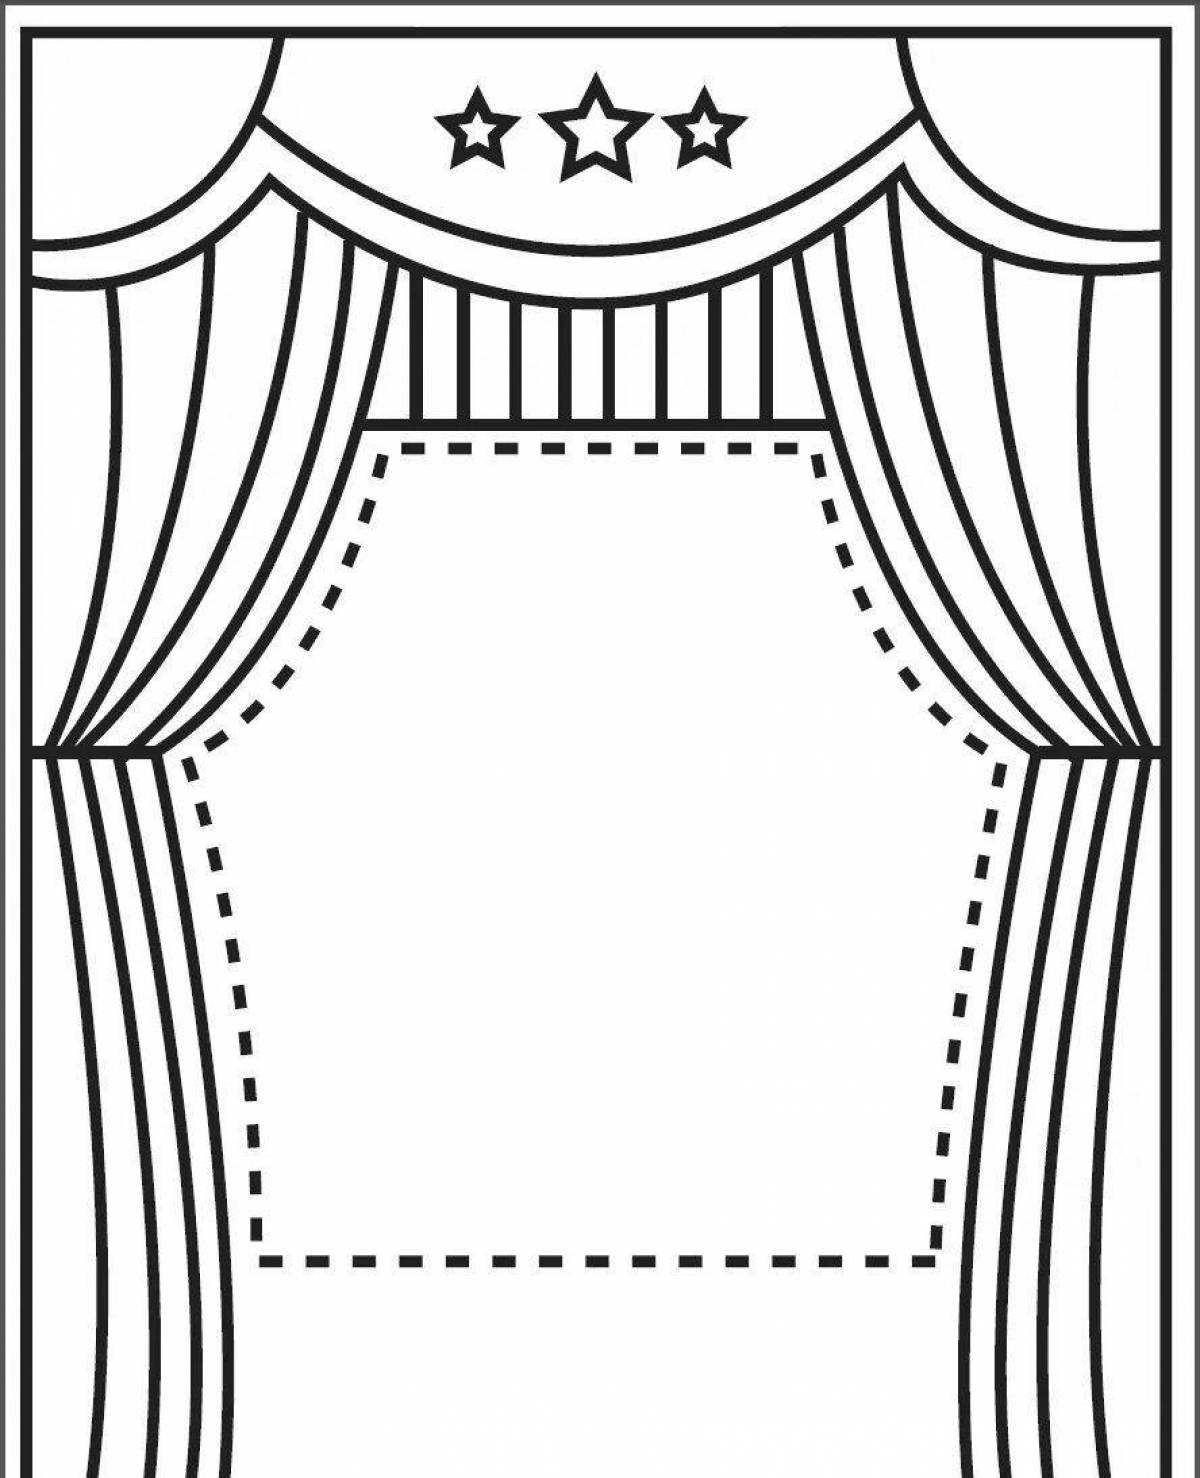 Coloring page joyful puppet theater